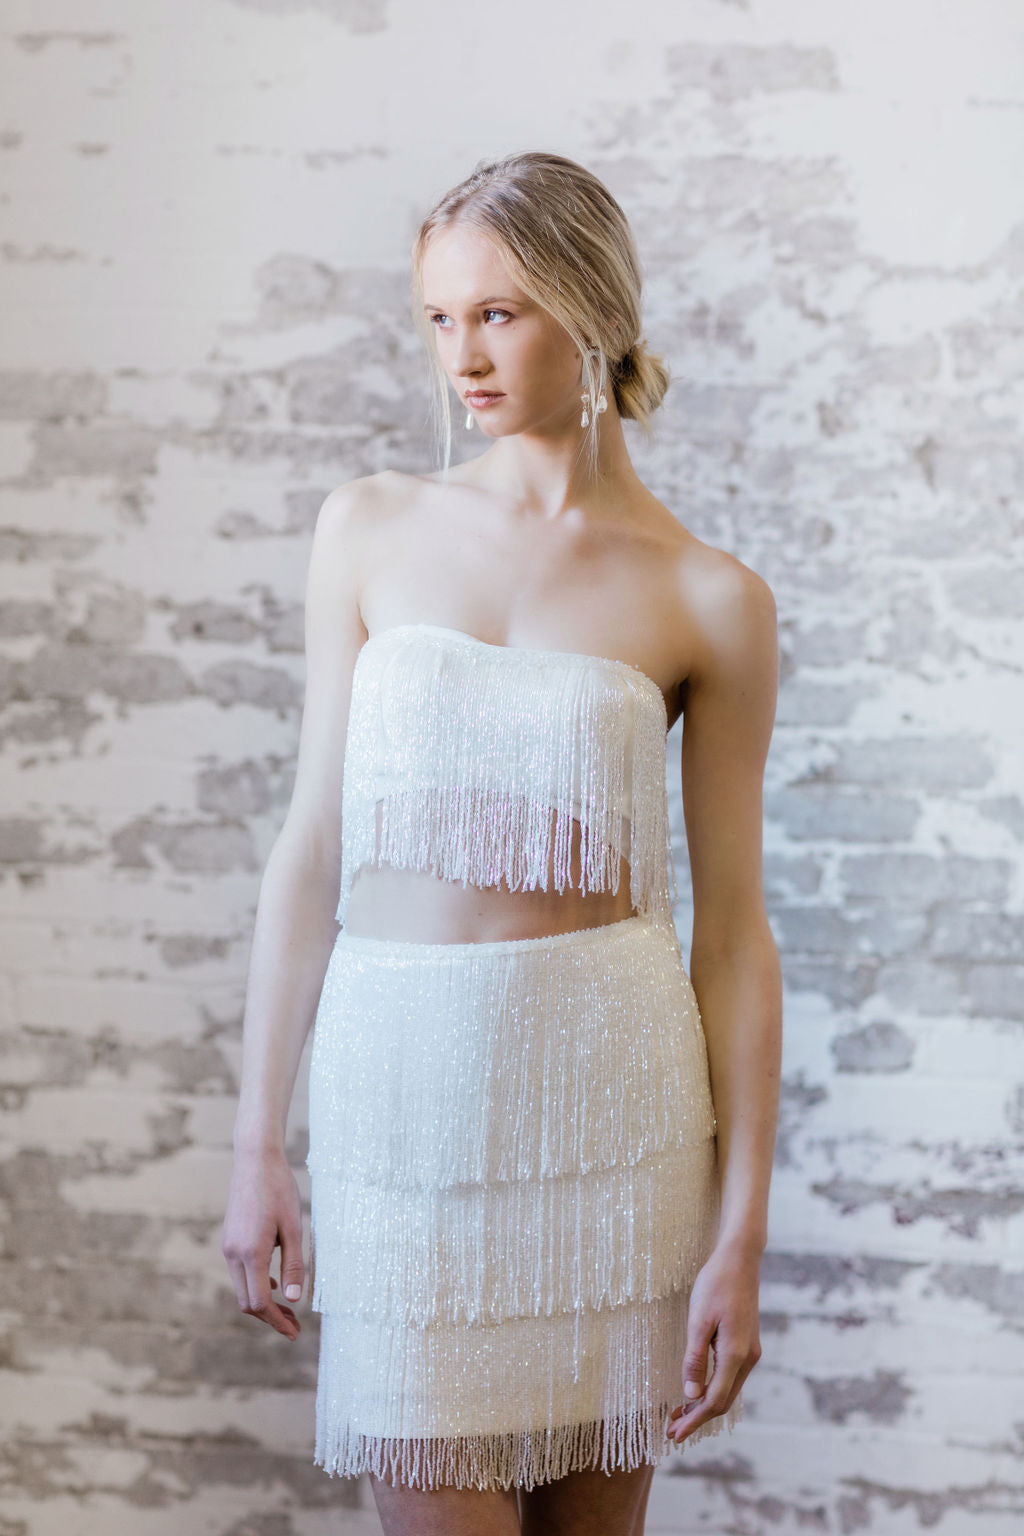 Beaded fringe bridal top. Made in Canada by Catherine Langlois.